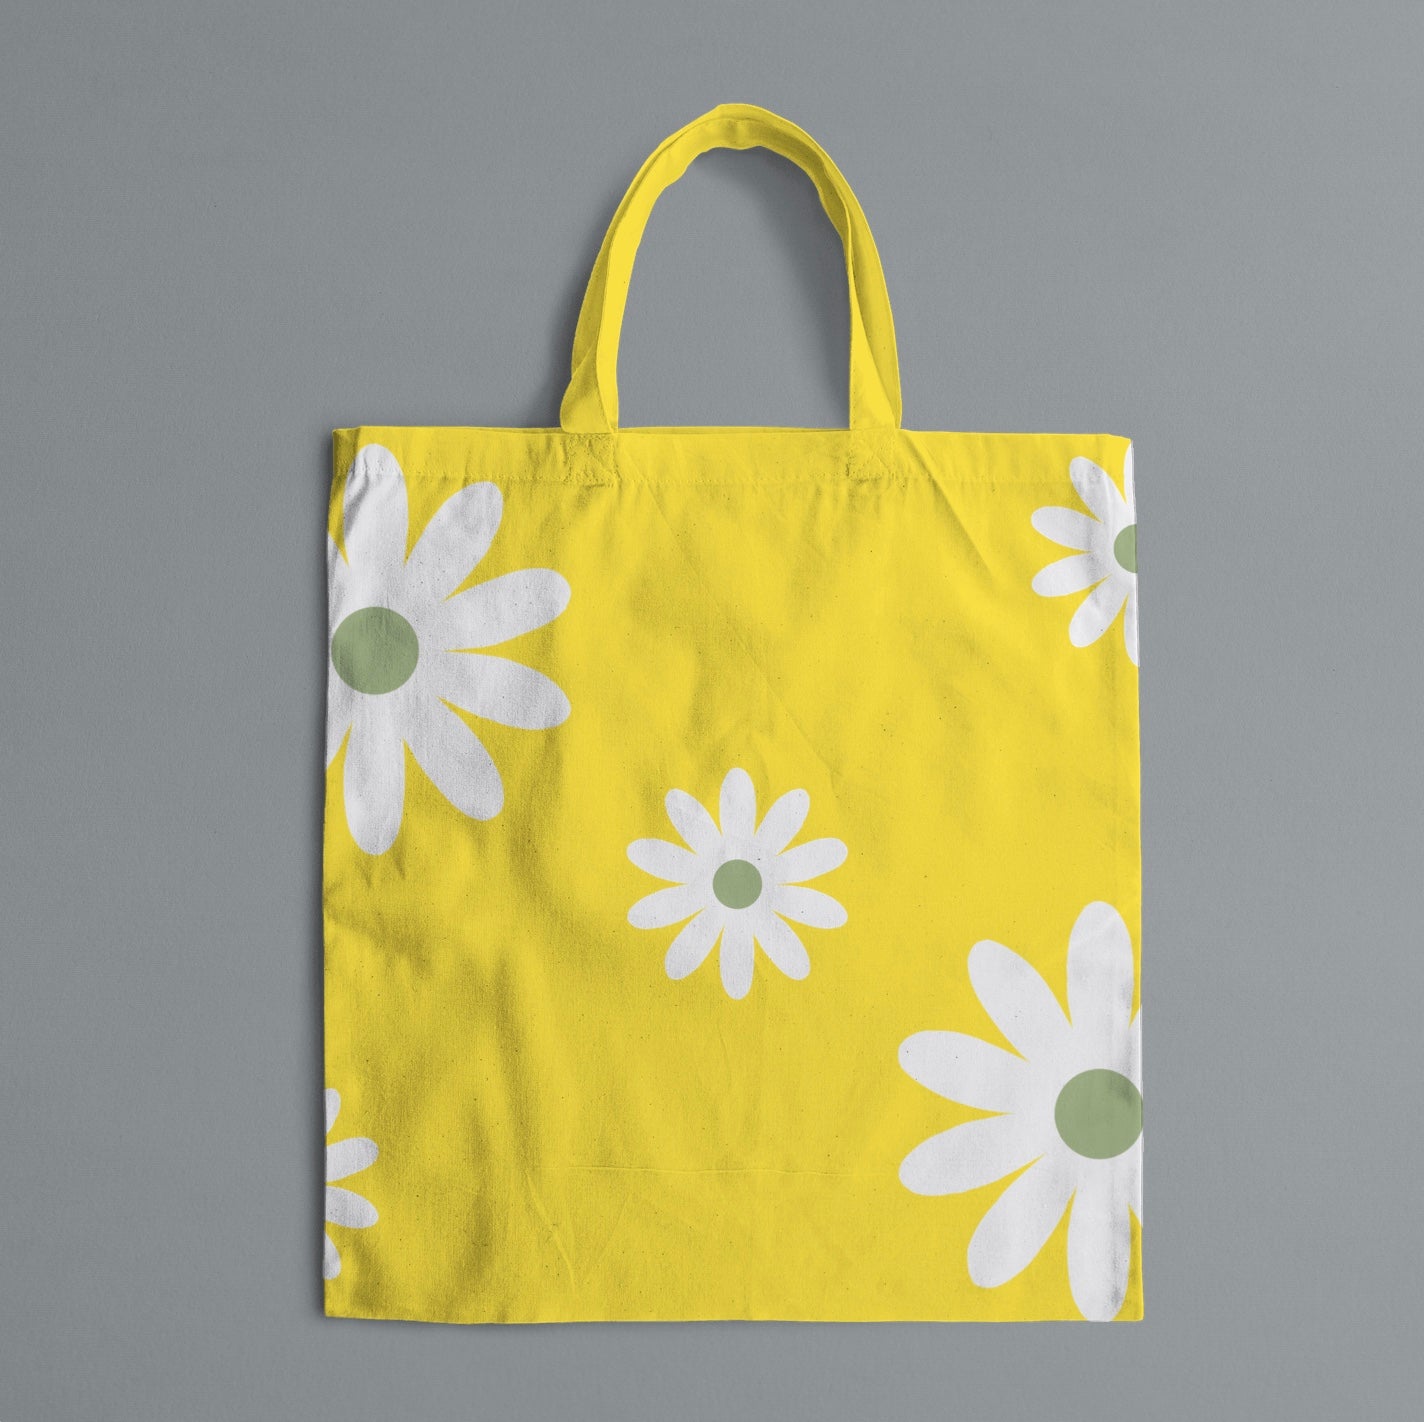 yellow tote bag with white flowers on gray background